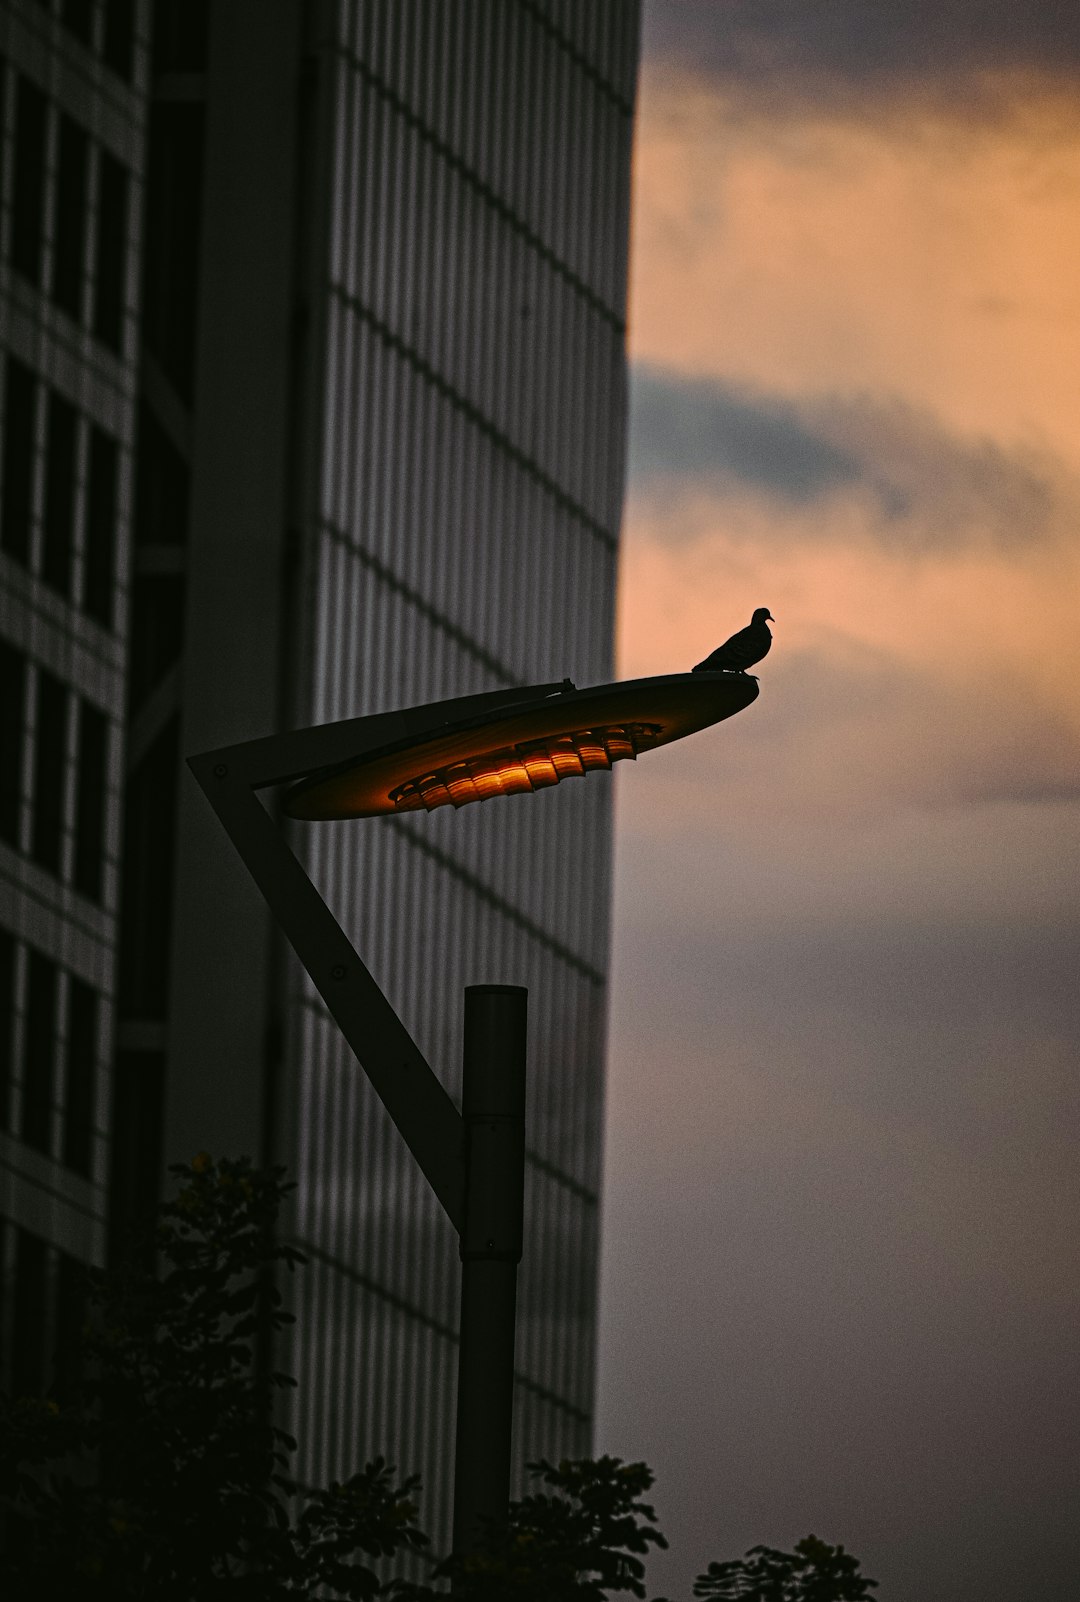 silhouette of bird flying over the building during night time